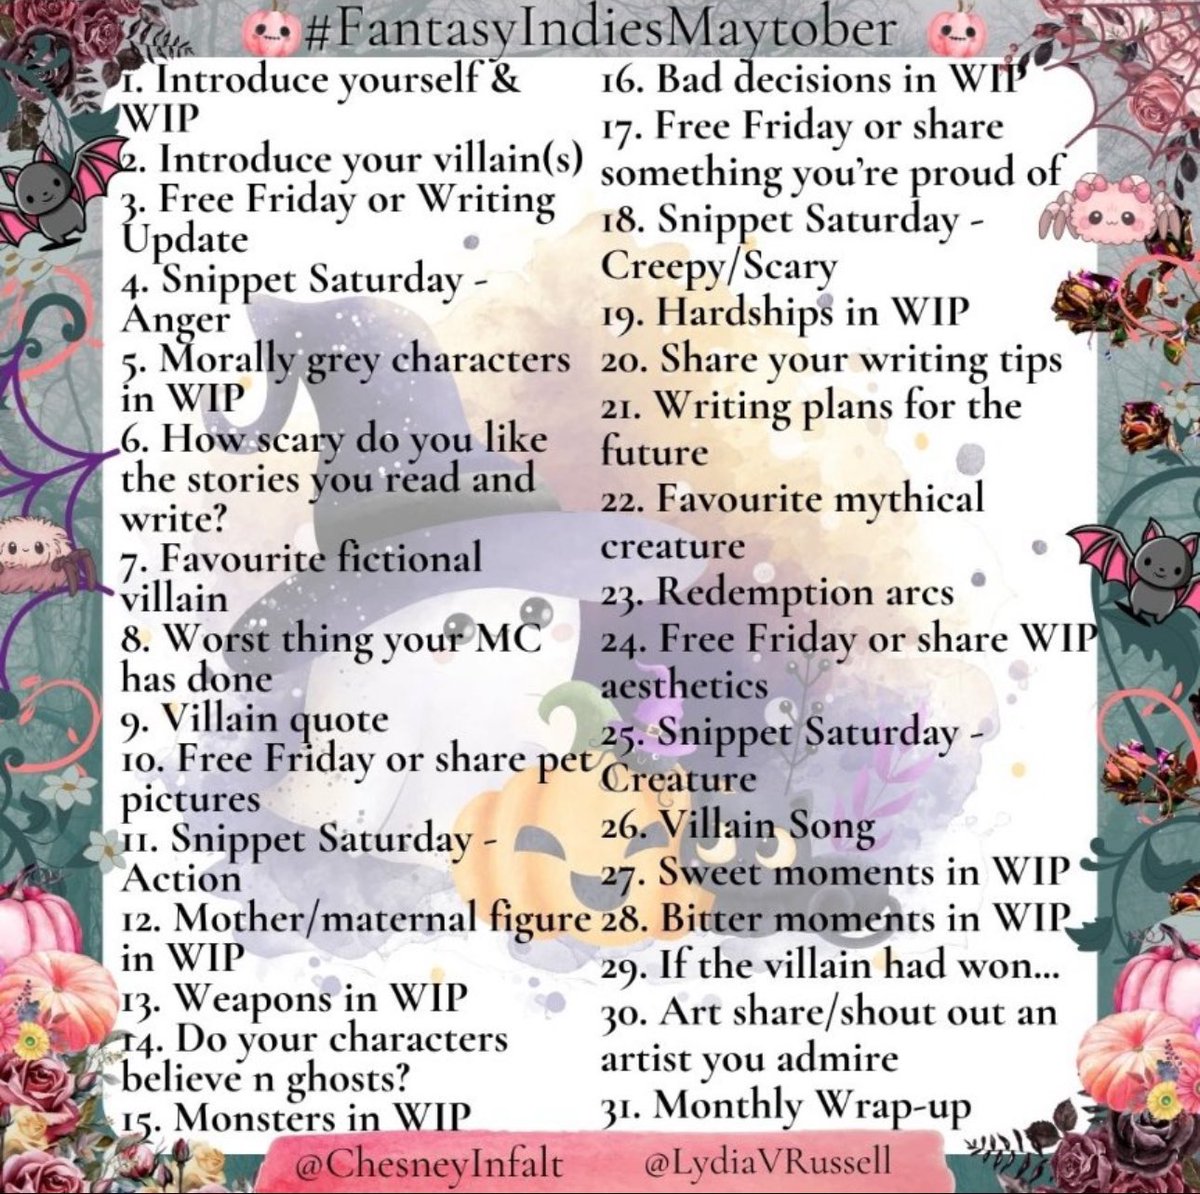 #FantasyIndiesMay #Day5 #writingcommunity #WIP #FrantasyIndiesMaytober #bookcharacters
Morally grey characters in my WIP: there are a few, but they feel more like NPCs in an RPG game.